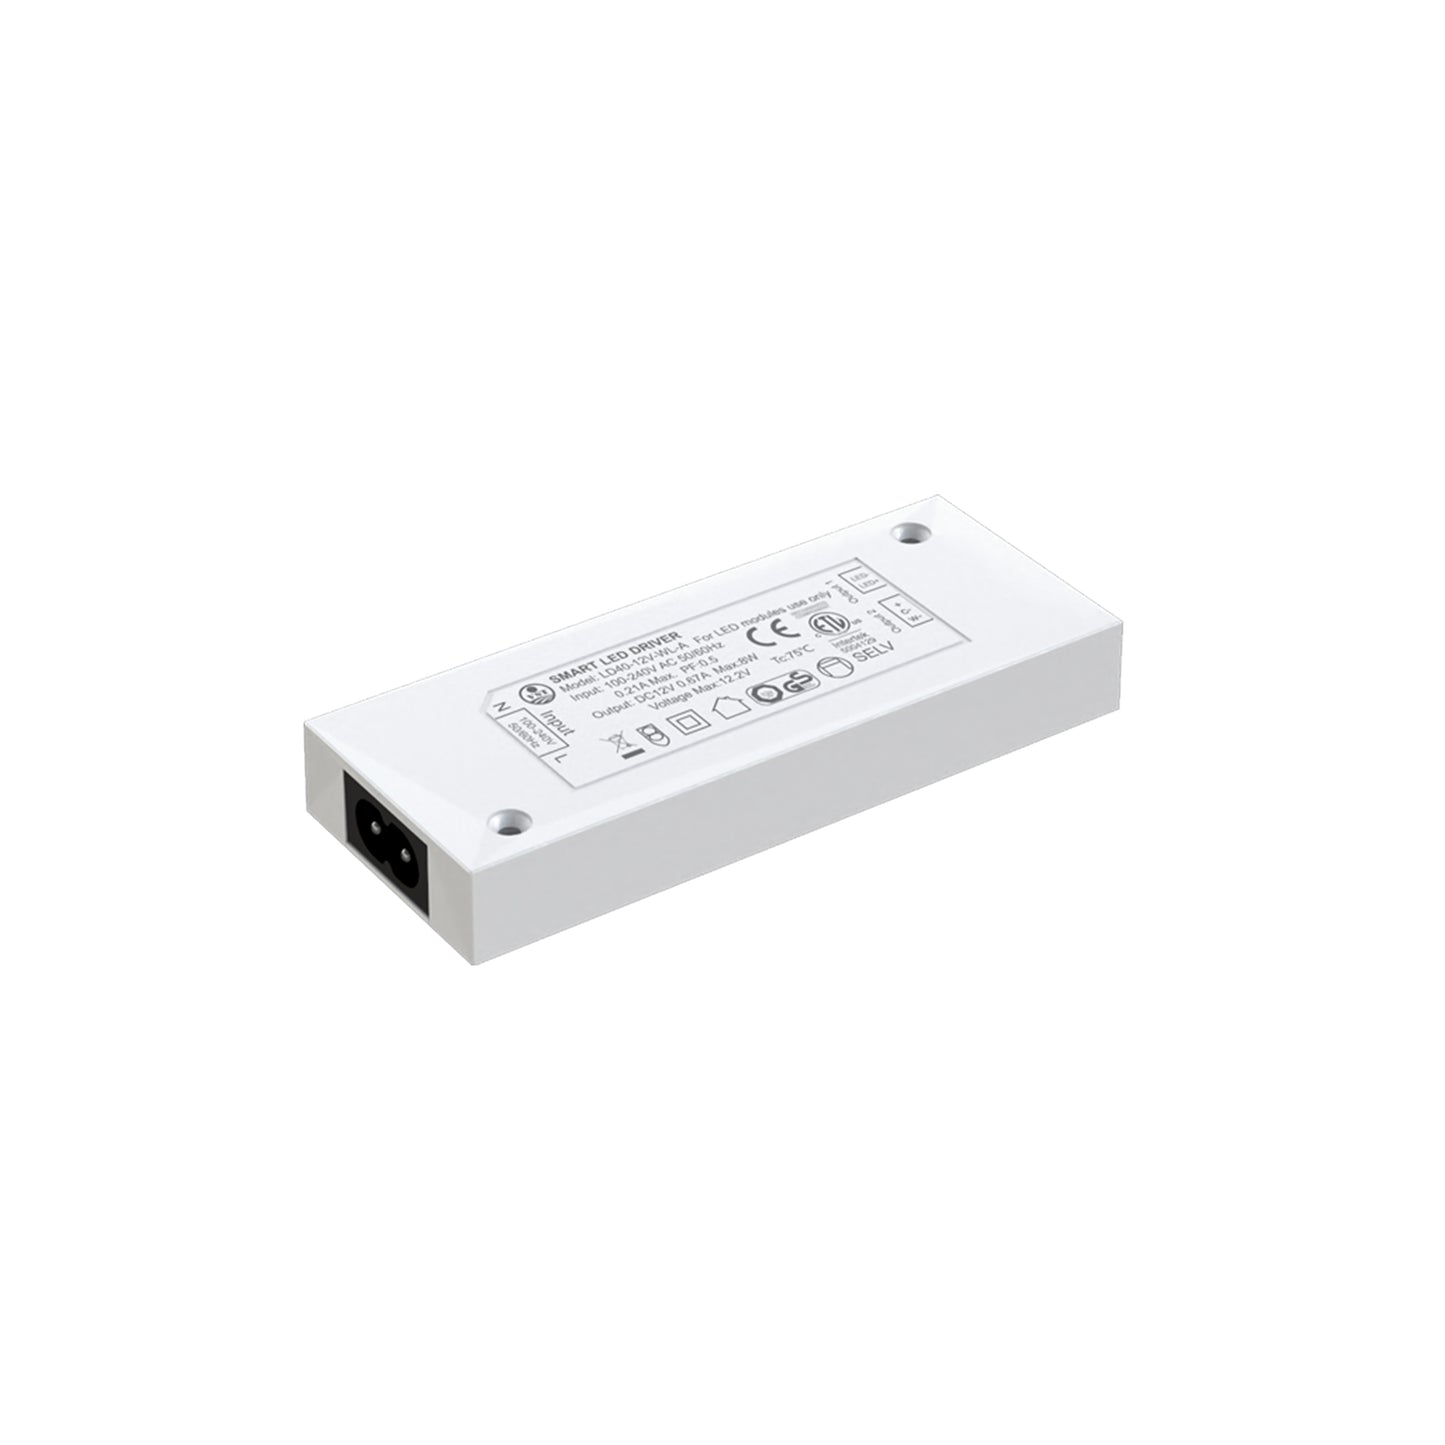 Send Inquiry for LED Power Supply Replacement 8W LED Tape Transformer with TUV-GS/ETL to high-quality LED Light Driver supplier. Wholesale LED Tape Transformer directly from China LED Light Driver manufacturers and exporters. Get a factory sale price list and become a distributor/agent | VSTLED.COM